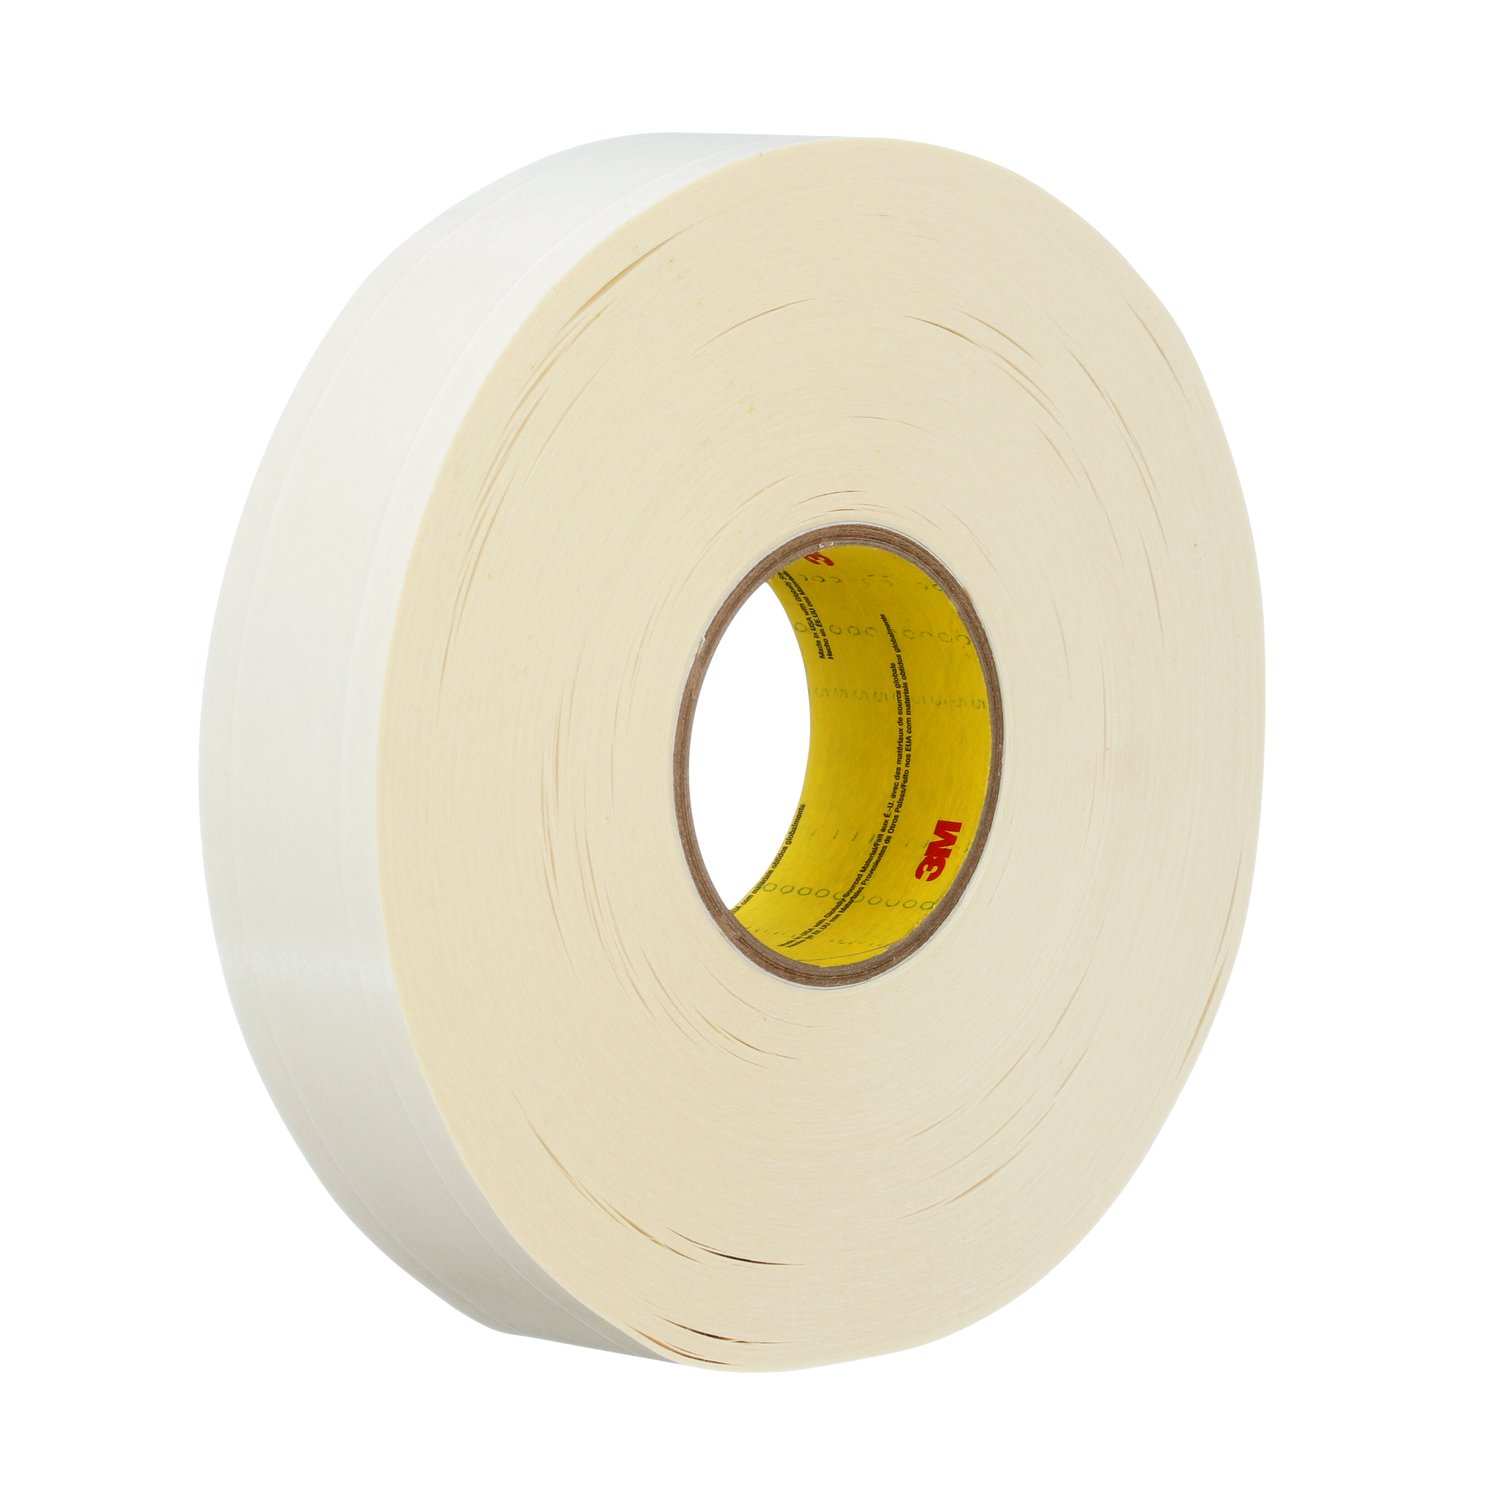 7100028176 - 3M Repulpable Heavy Duty Double Coated Tape R3287, White, 72 mm x 165
m, 5 mil, 3 rolls per case